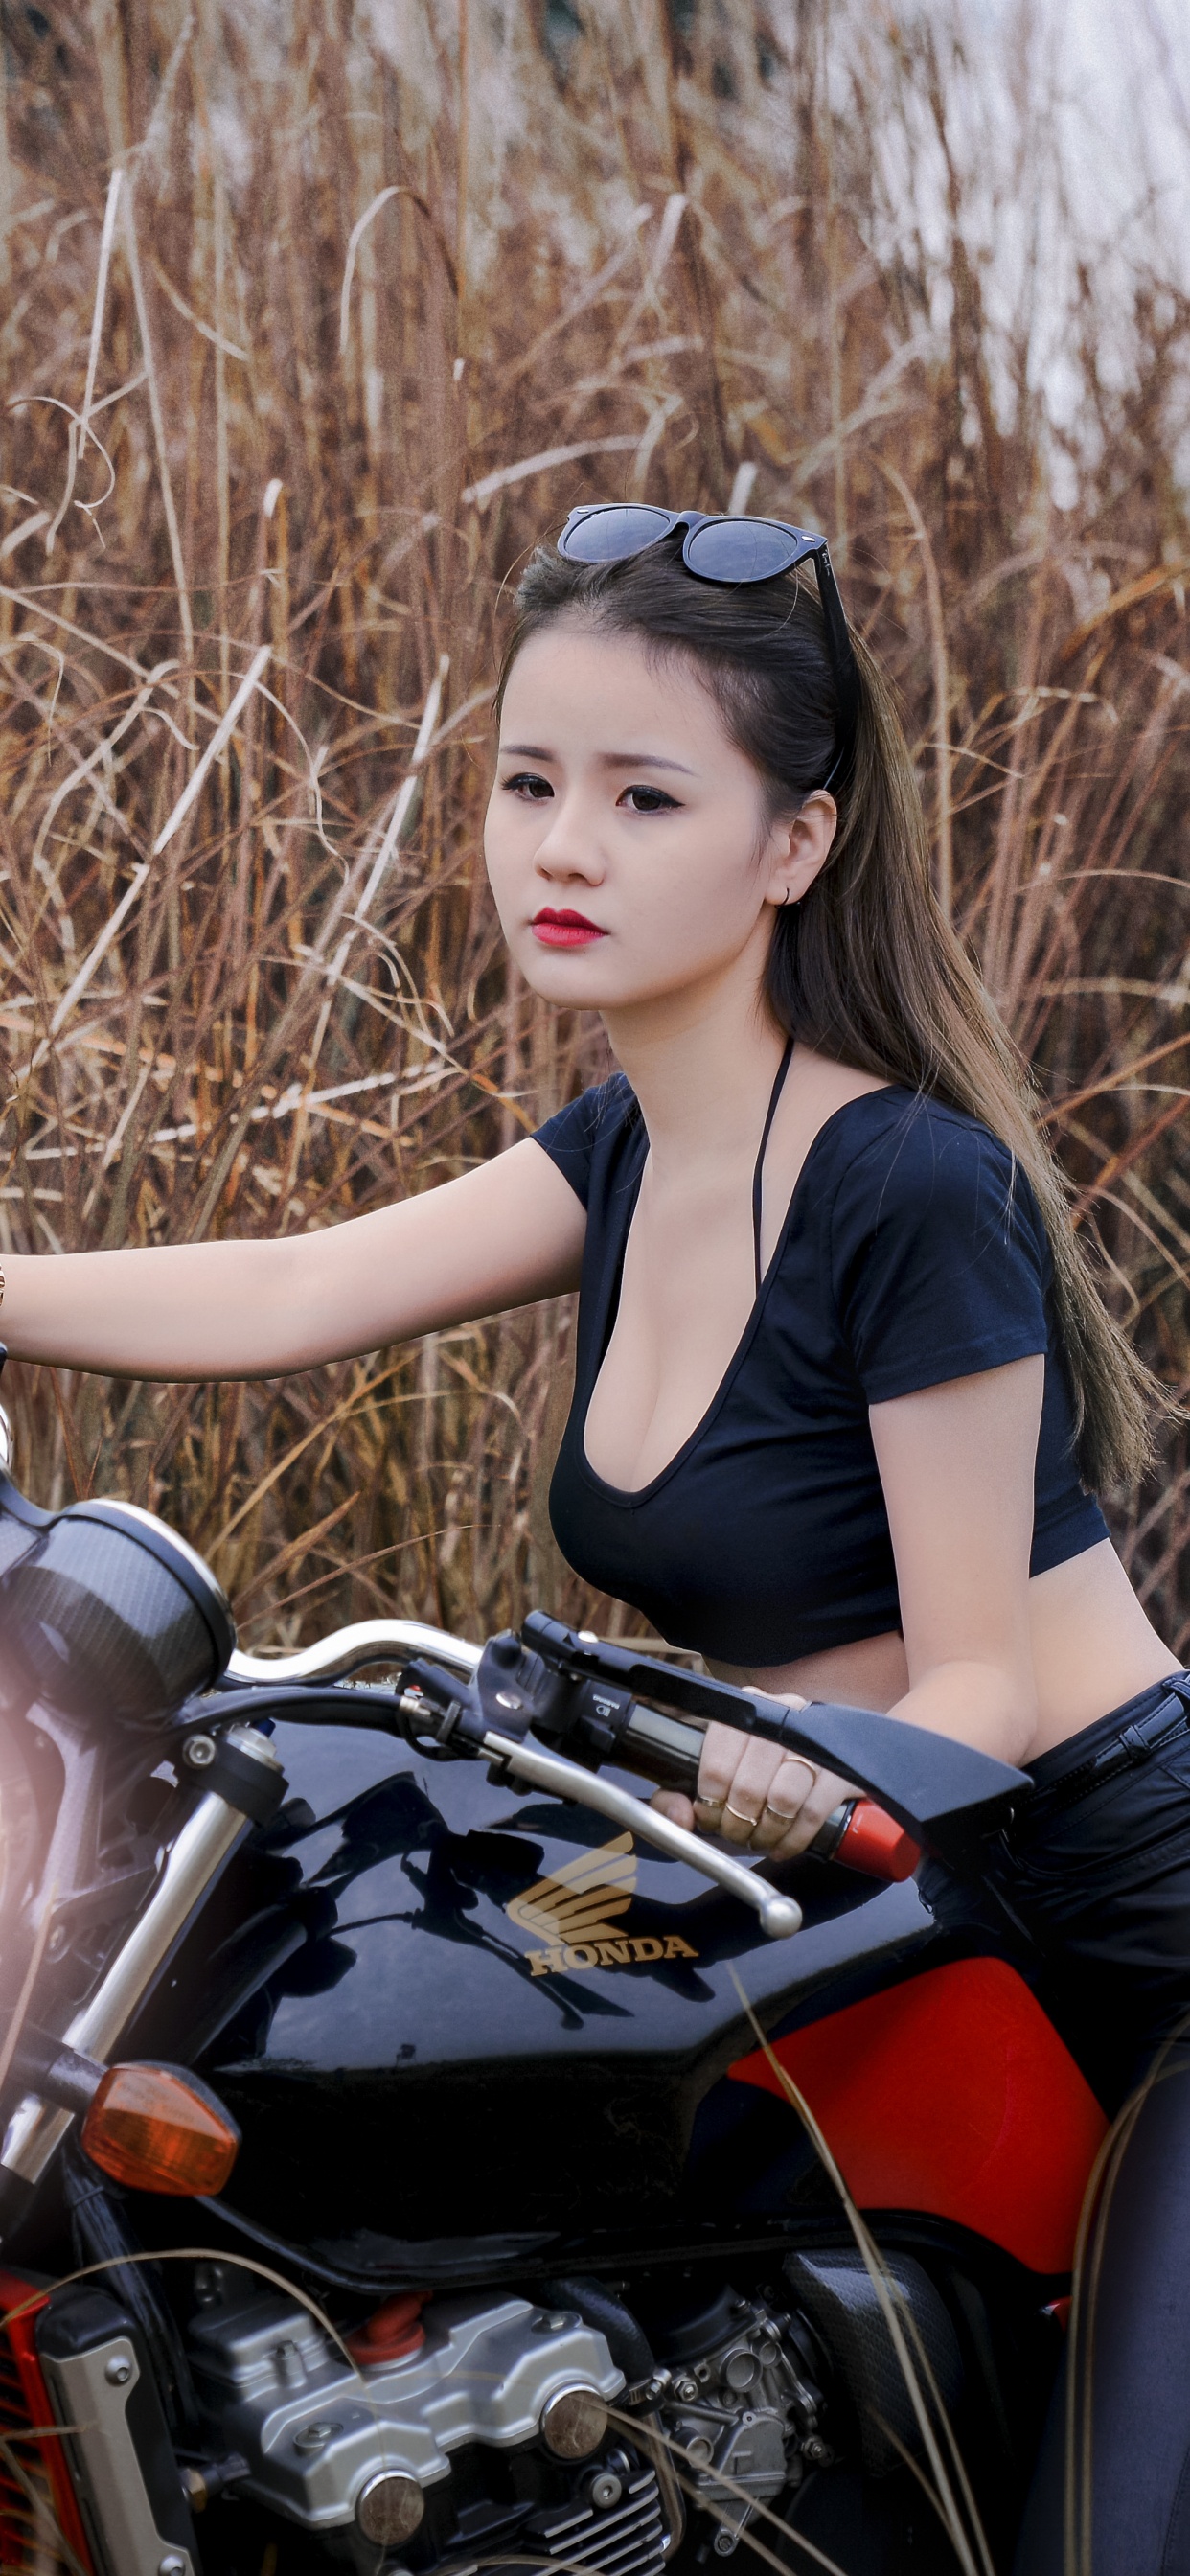 Woman in Black Tank Top and Black Leggings Sitting on Red and Black Motorcycle. Wallpaper in 1242x2688 Resolution